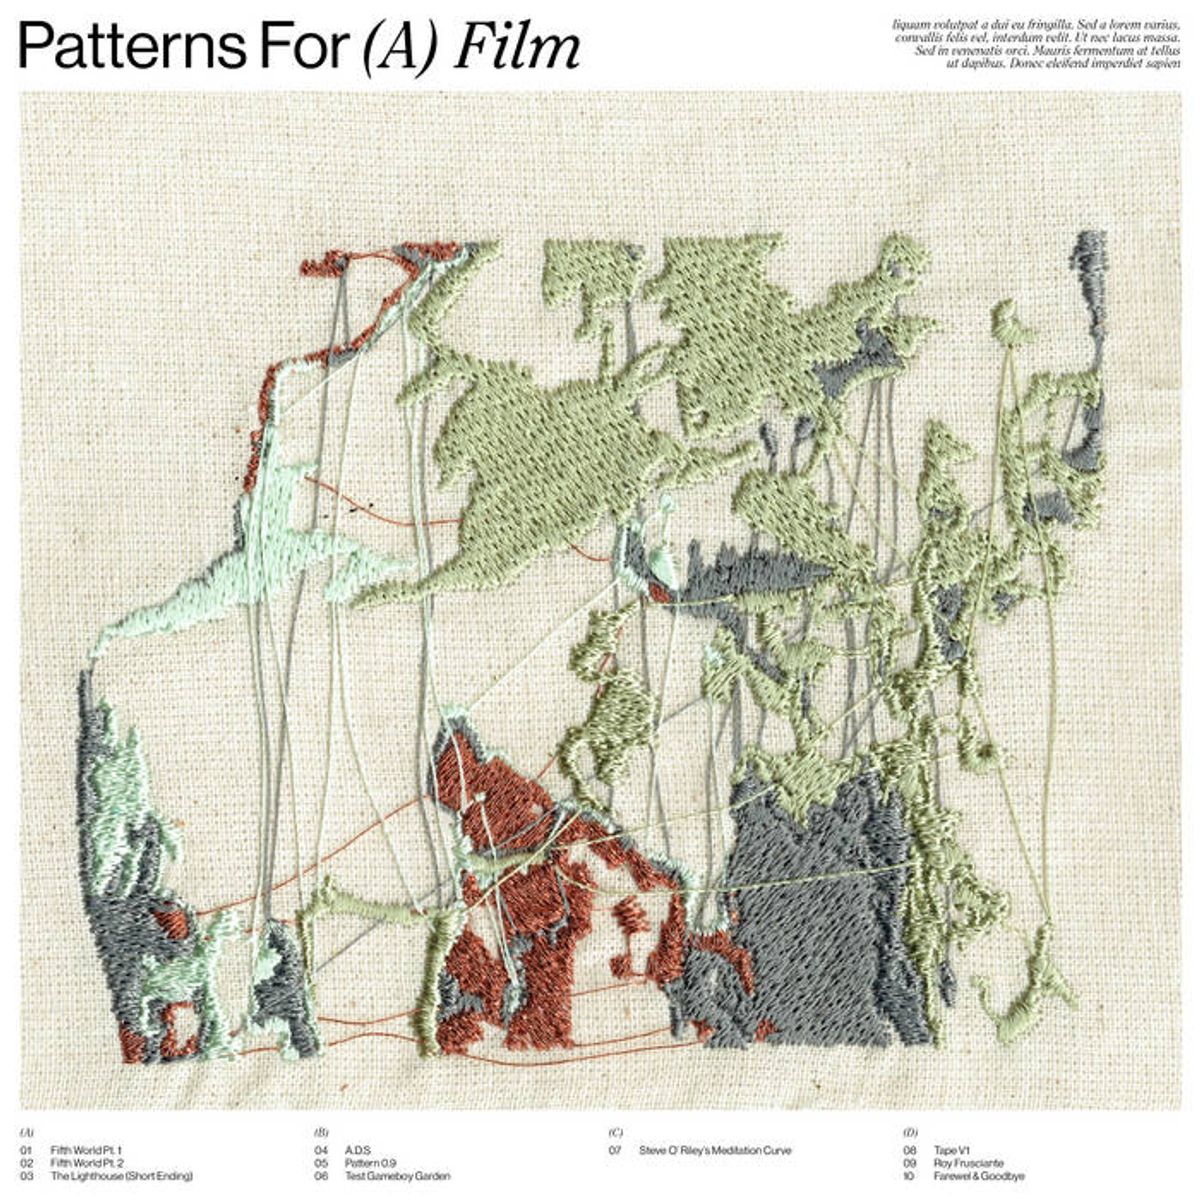 Patterns For (A) Film